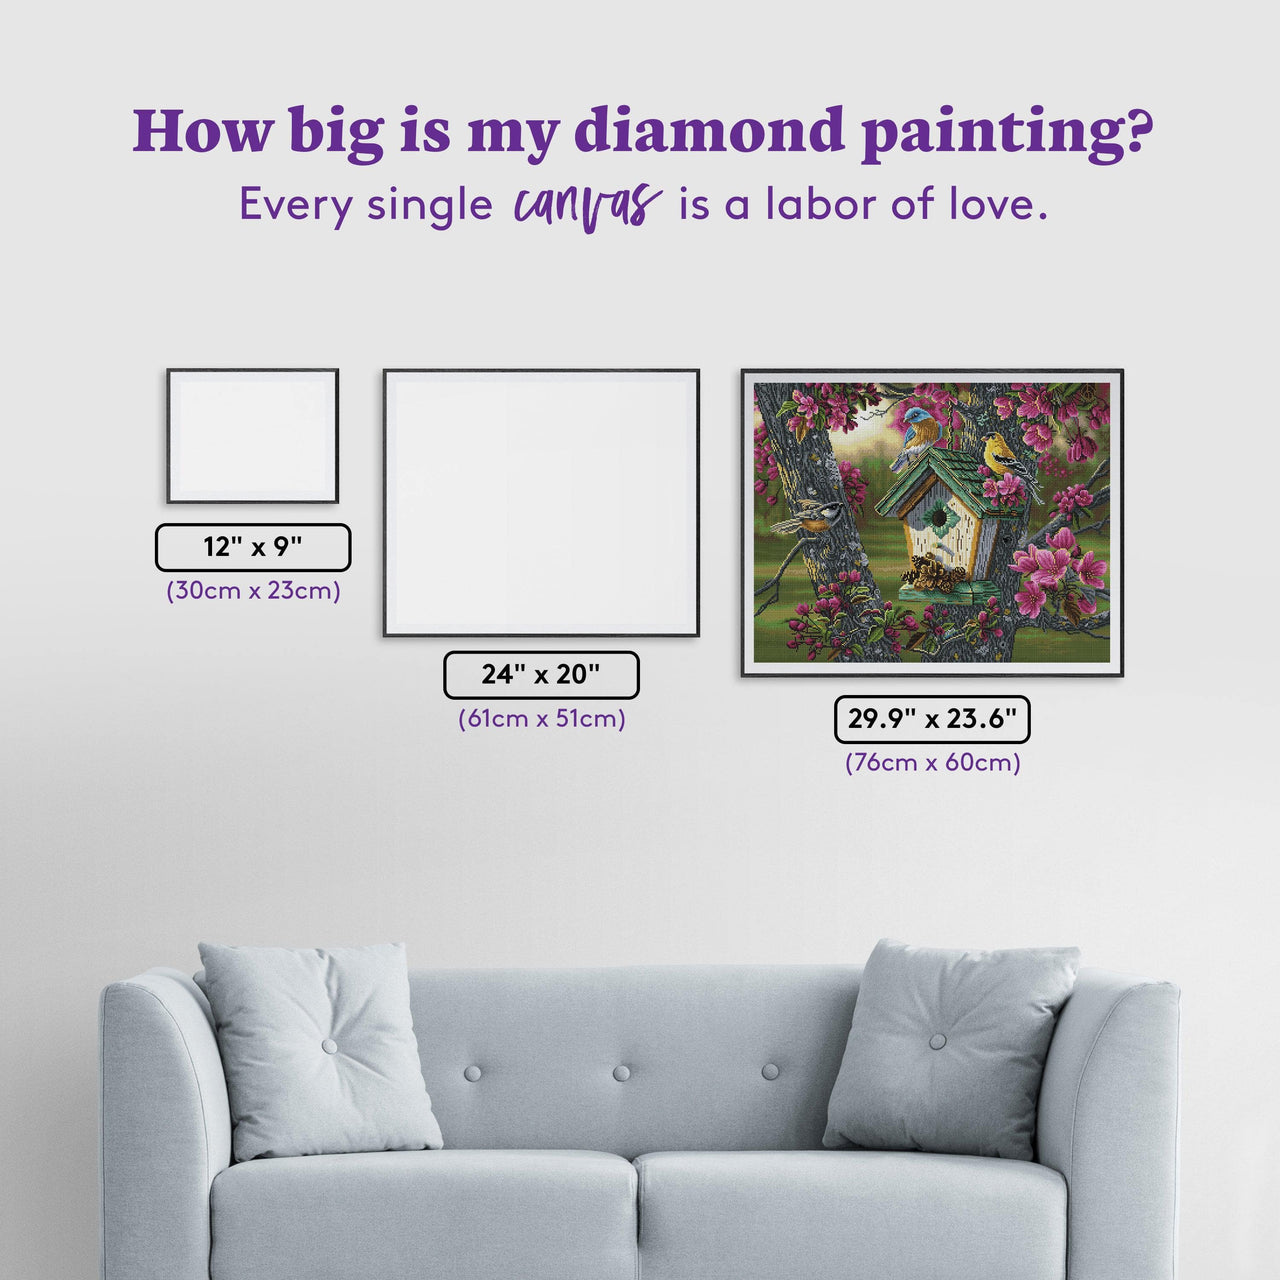 Diamond Painting Springtime Beauty 29.9" x 23.6" (76cm x 60cm) / Square With 67 Colors Including 5 ABs / 73,200